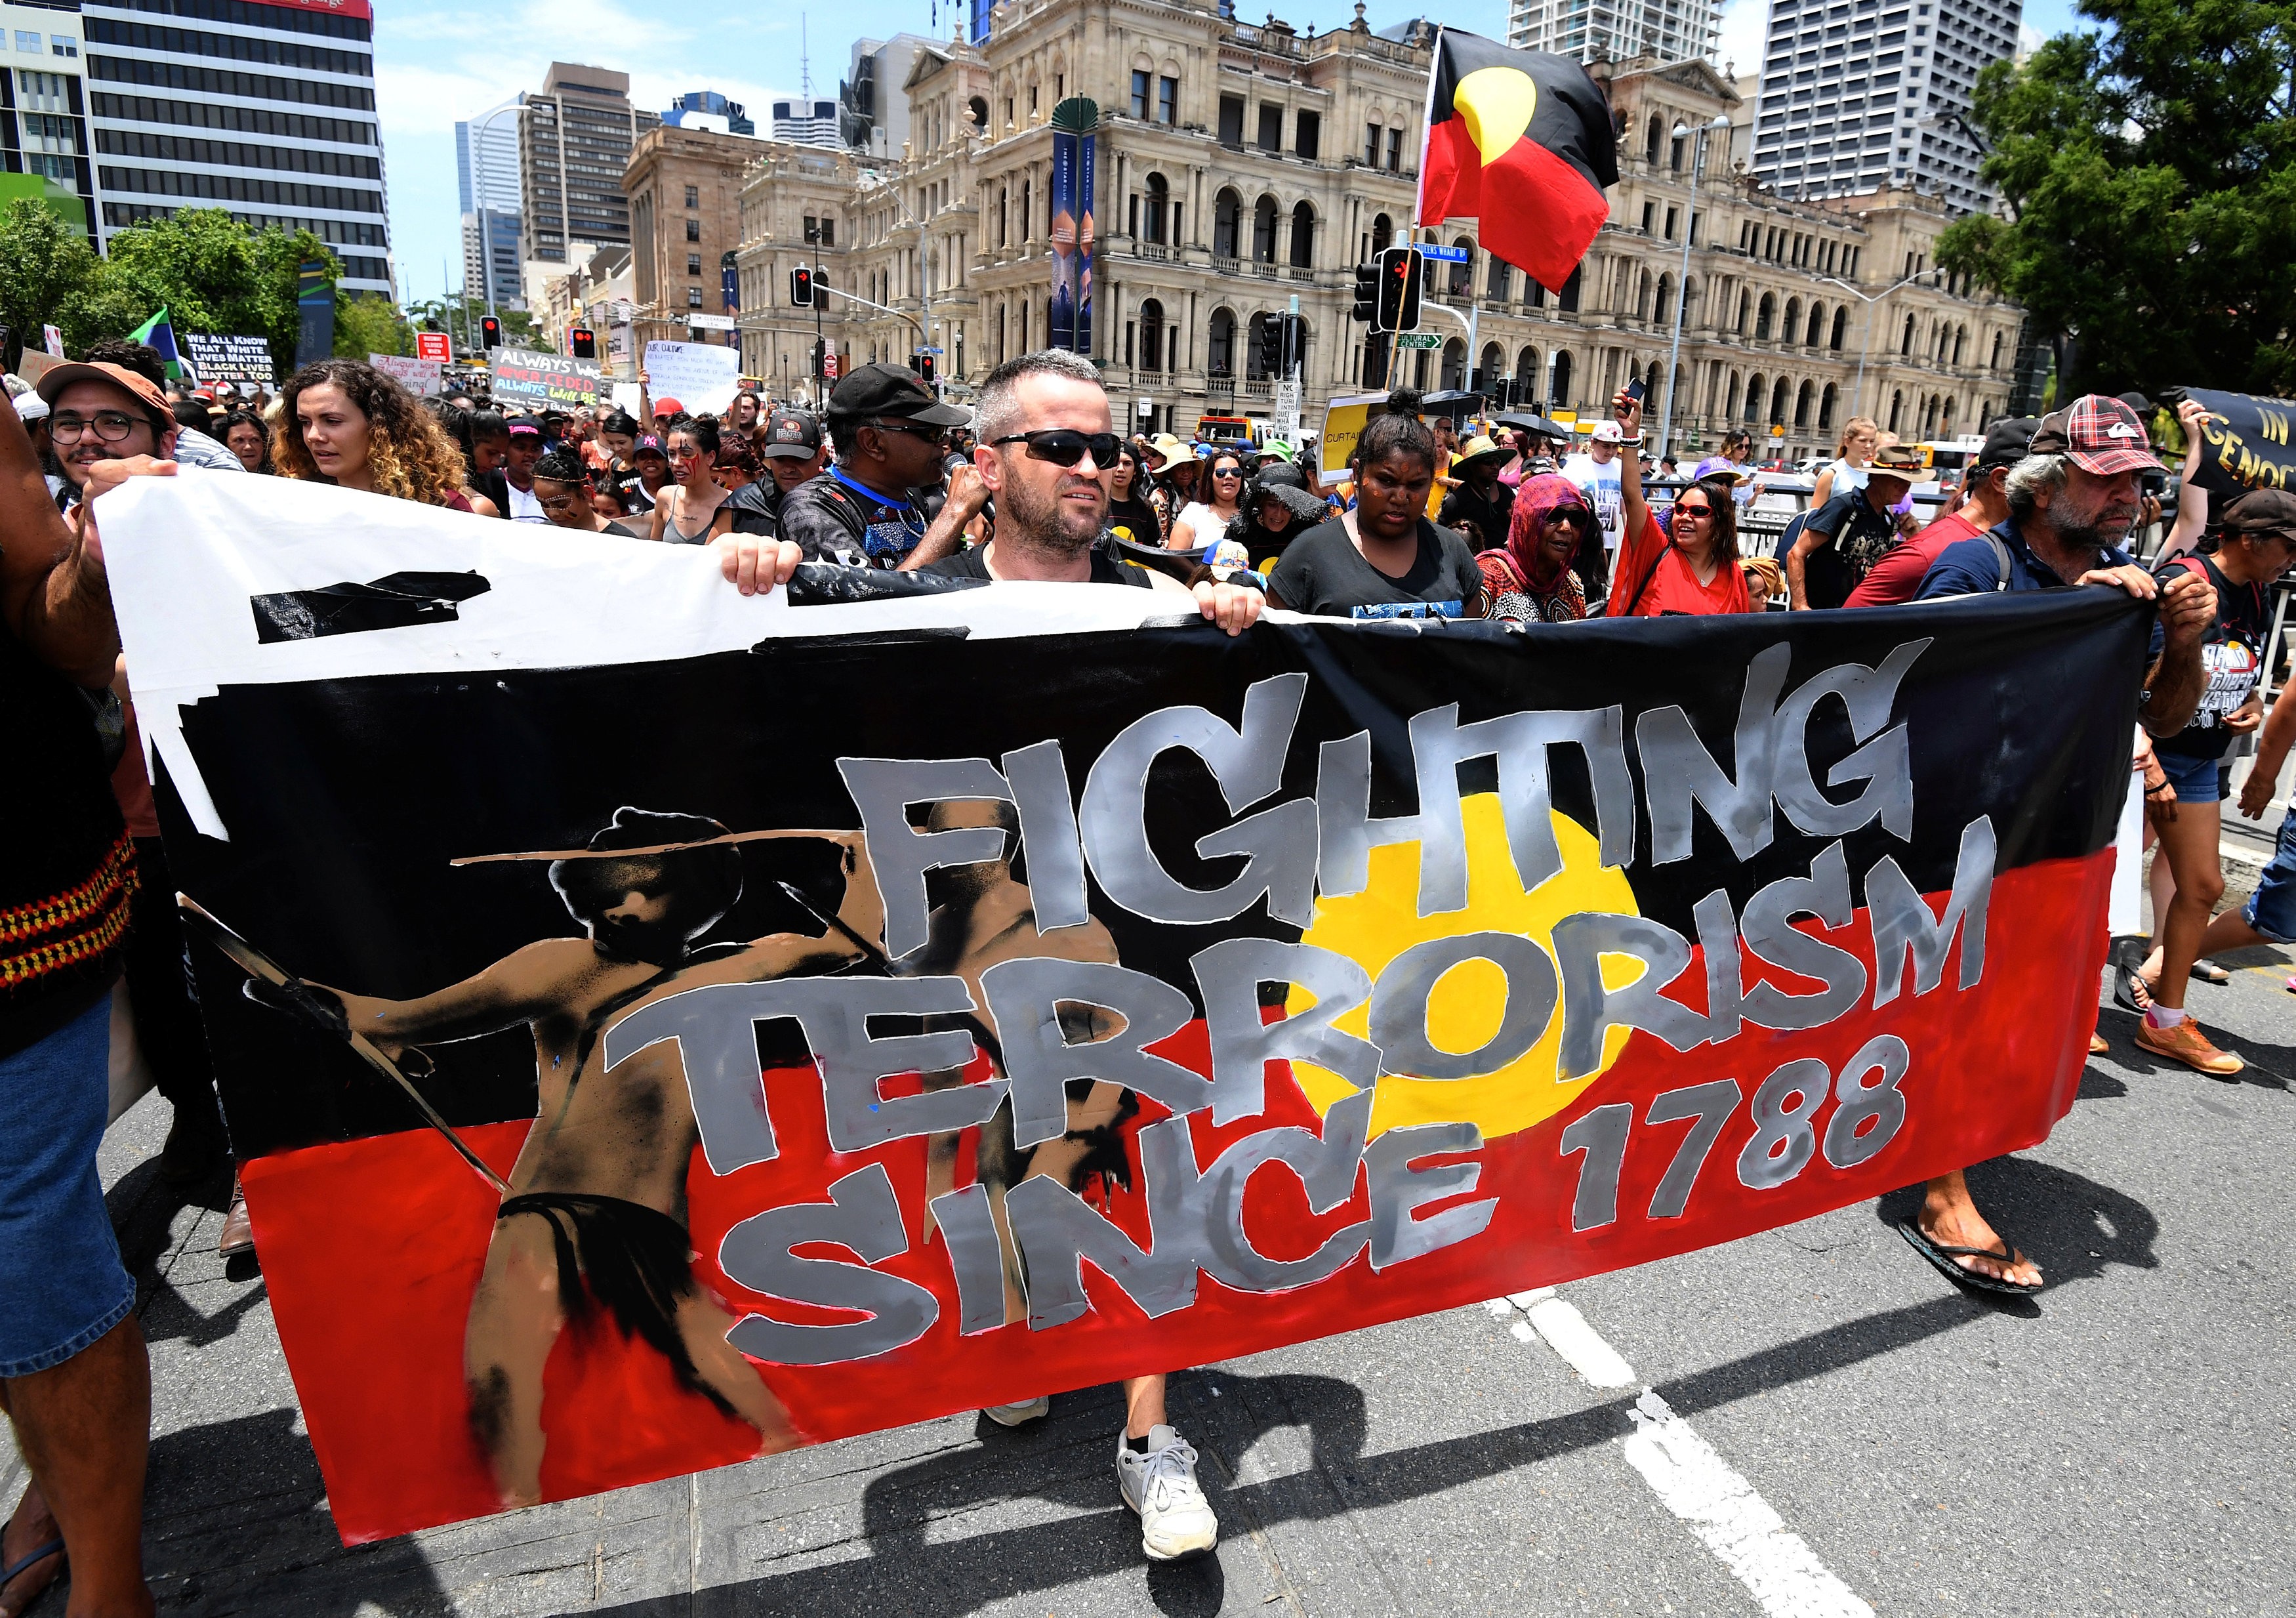 People hold signs and yell slogans as they join Aboriginal protesters in their march on Australia Day in central Brisbane on January 26, 2017. Photo: AAP